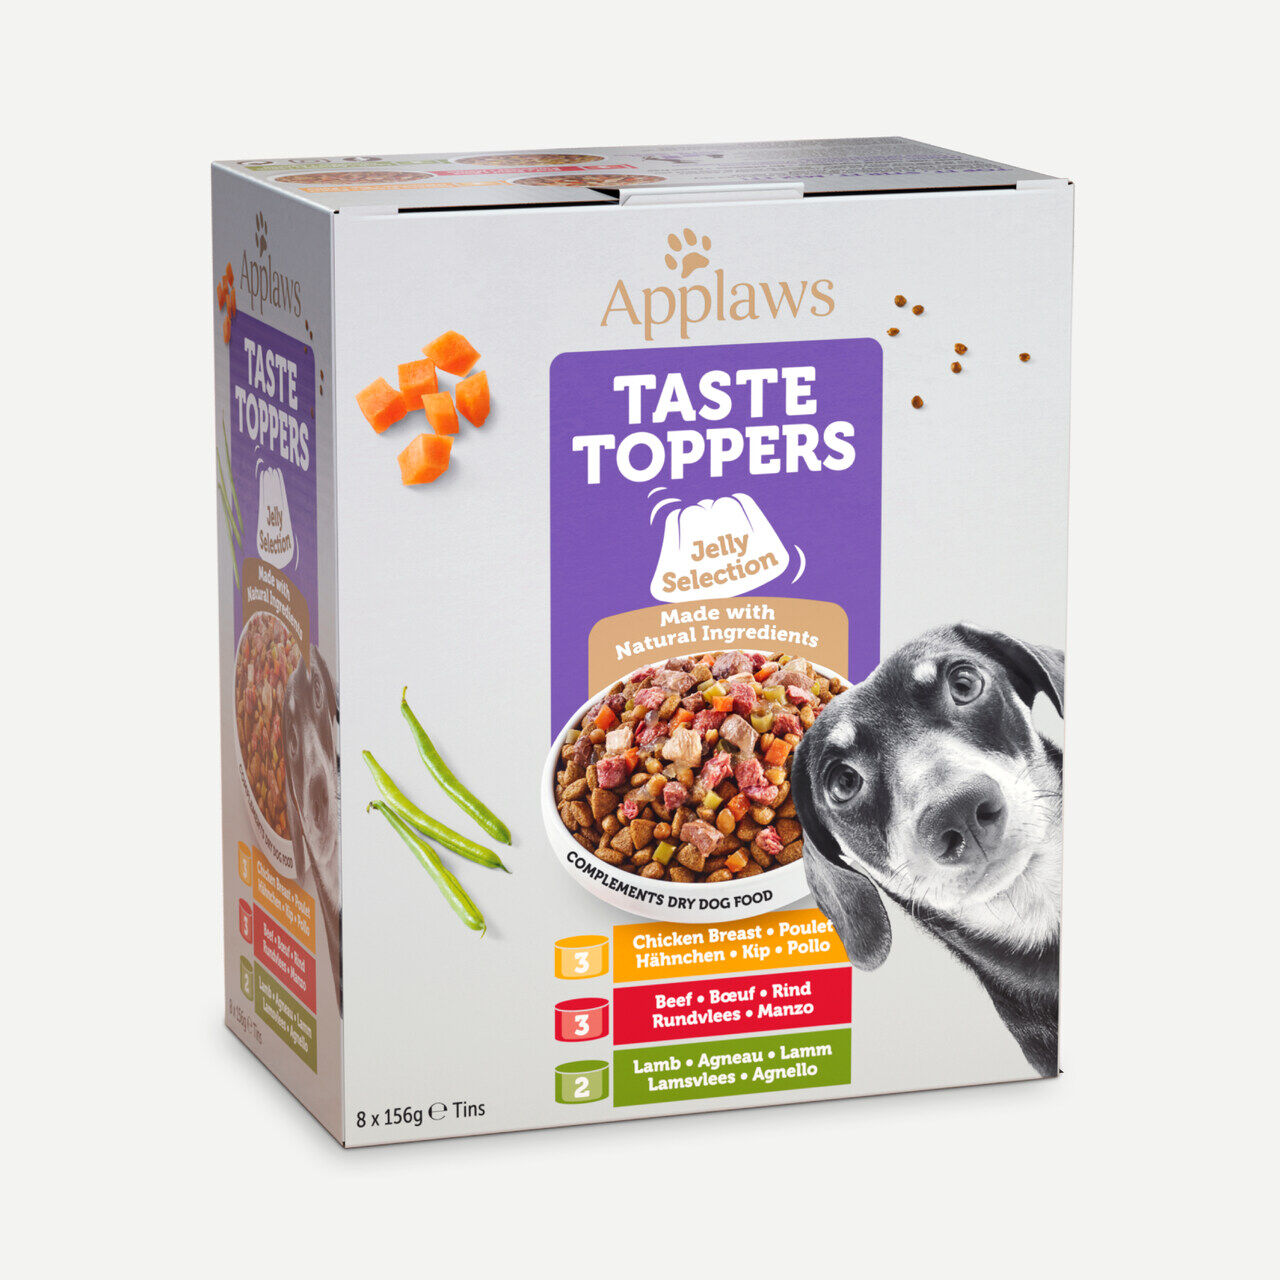 Applaws-Applaws-Taste-Toppers-Dose-Hund-Jelly-Multipack-Rind-Lamm-Huhn-Topping-fuer-Trockenfutter-in-Gelee-184096